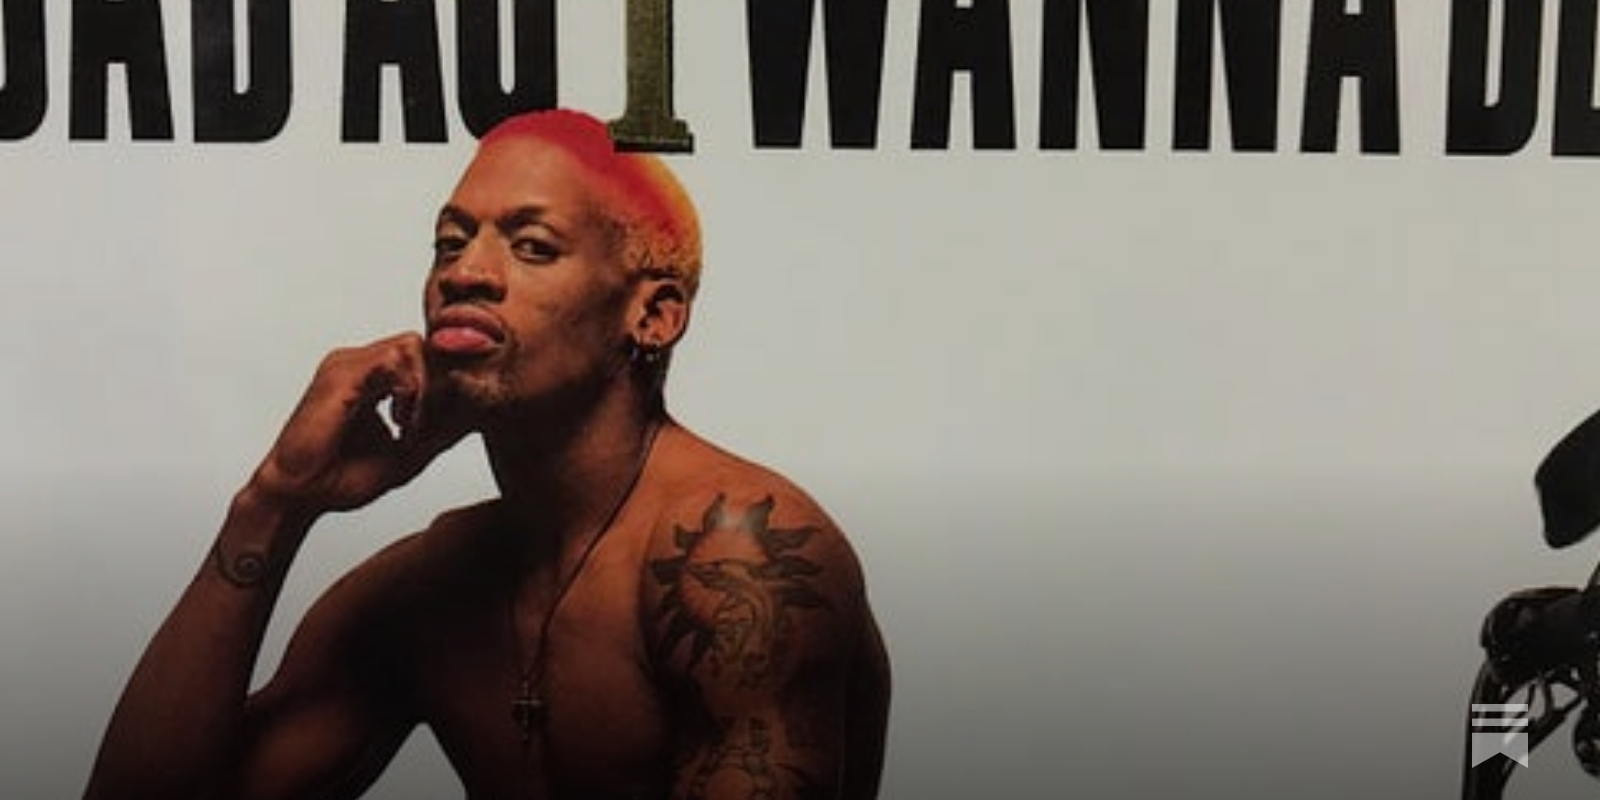 Saved from killing himself, NBA star Dennis Rodman went on to win